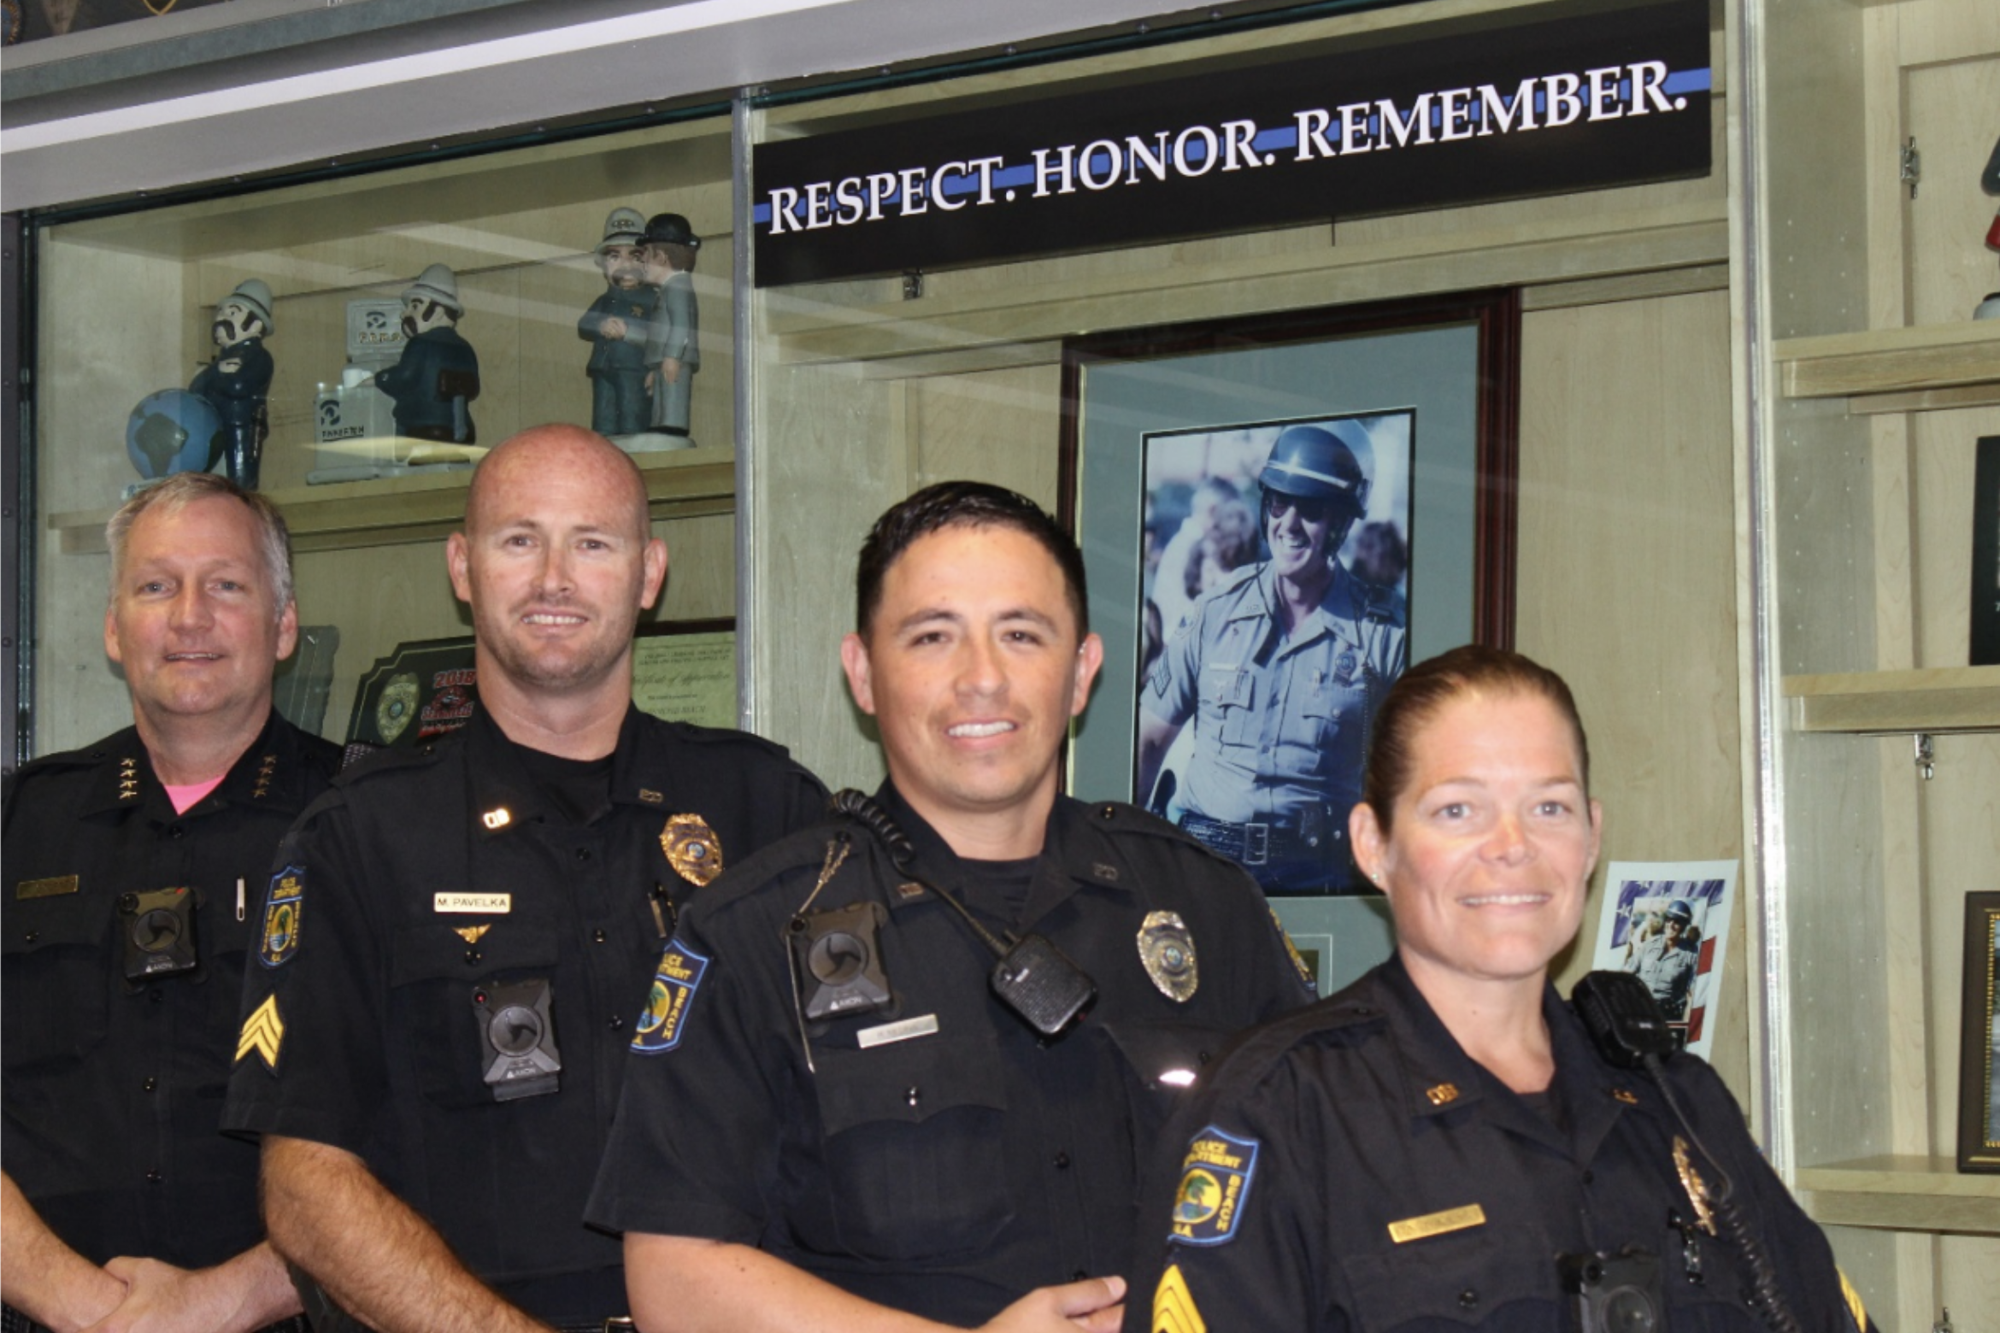 Police Chief Jesse Godfrey, Sgt. Mike Pavelka, Officer Rafael Medina and Sgt. Michelle Willis. Courtesy photo